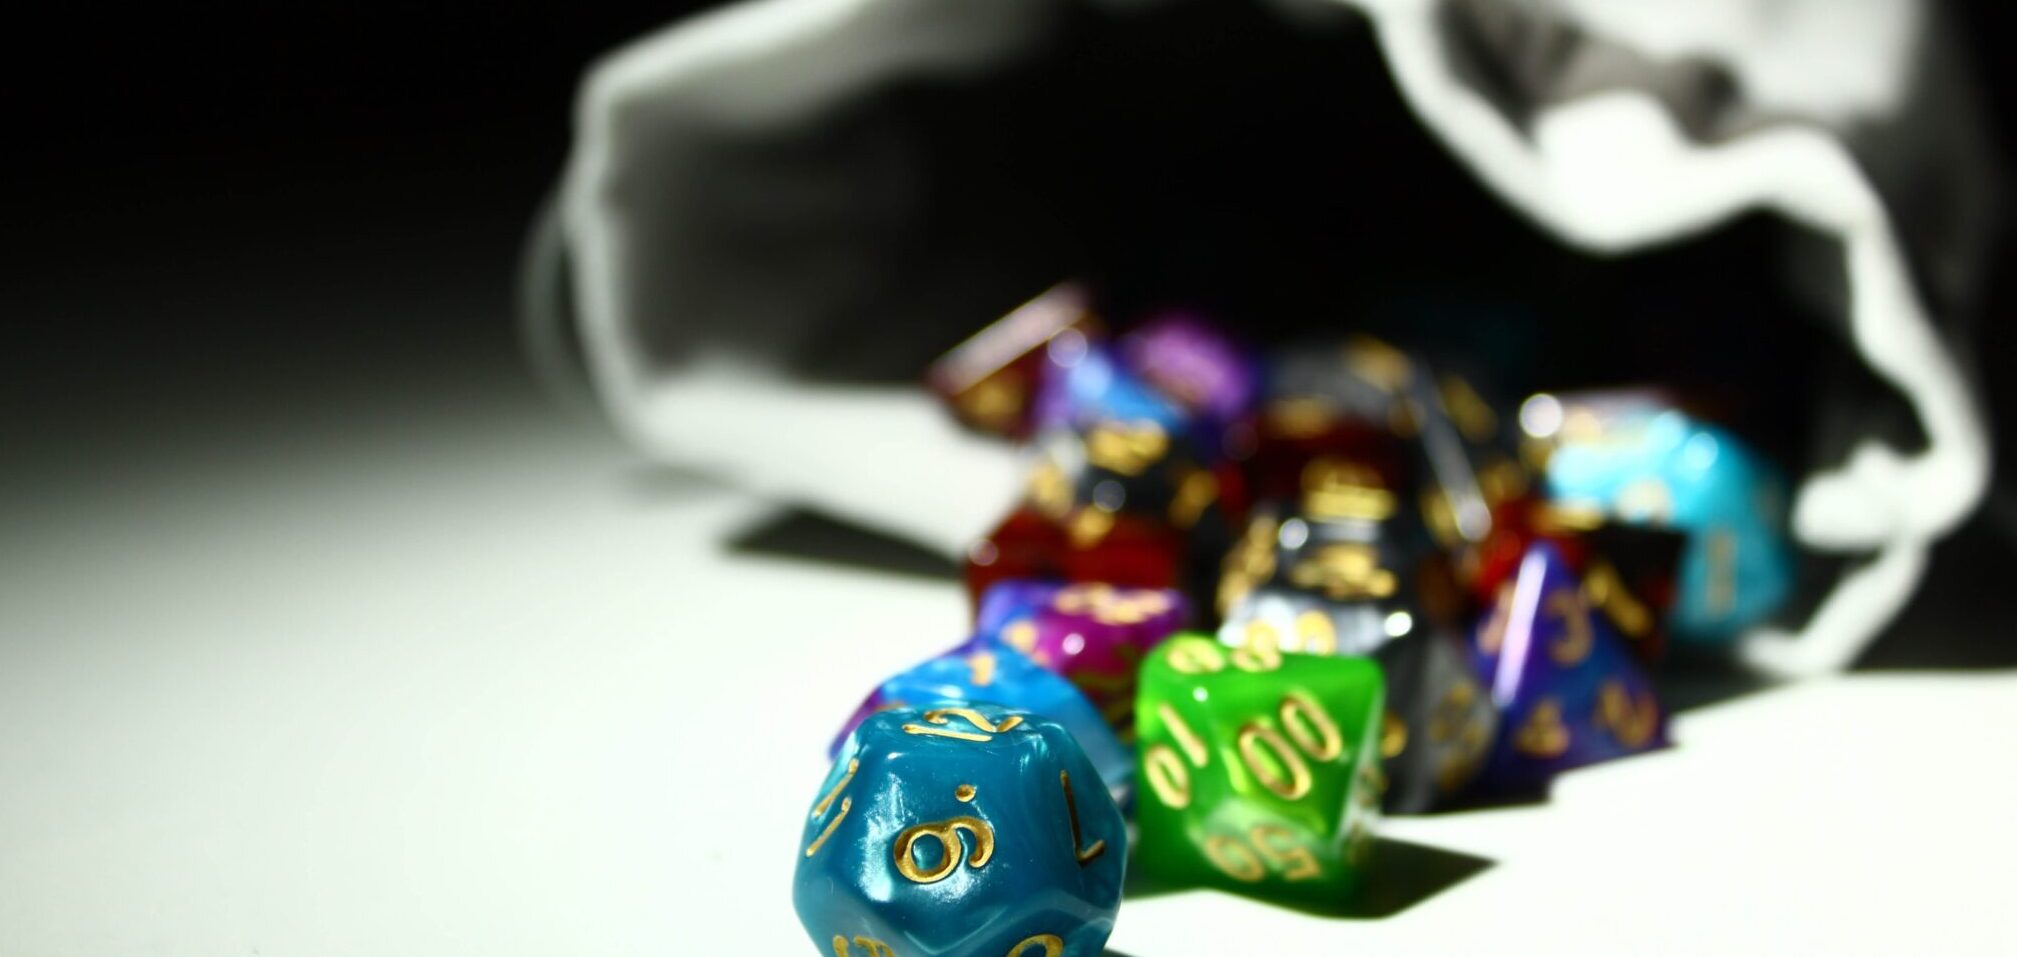 Dice from the game Dungeons and Dragons